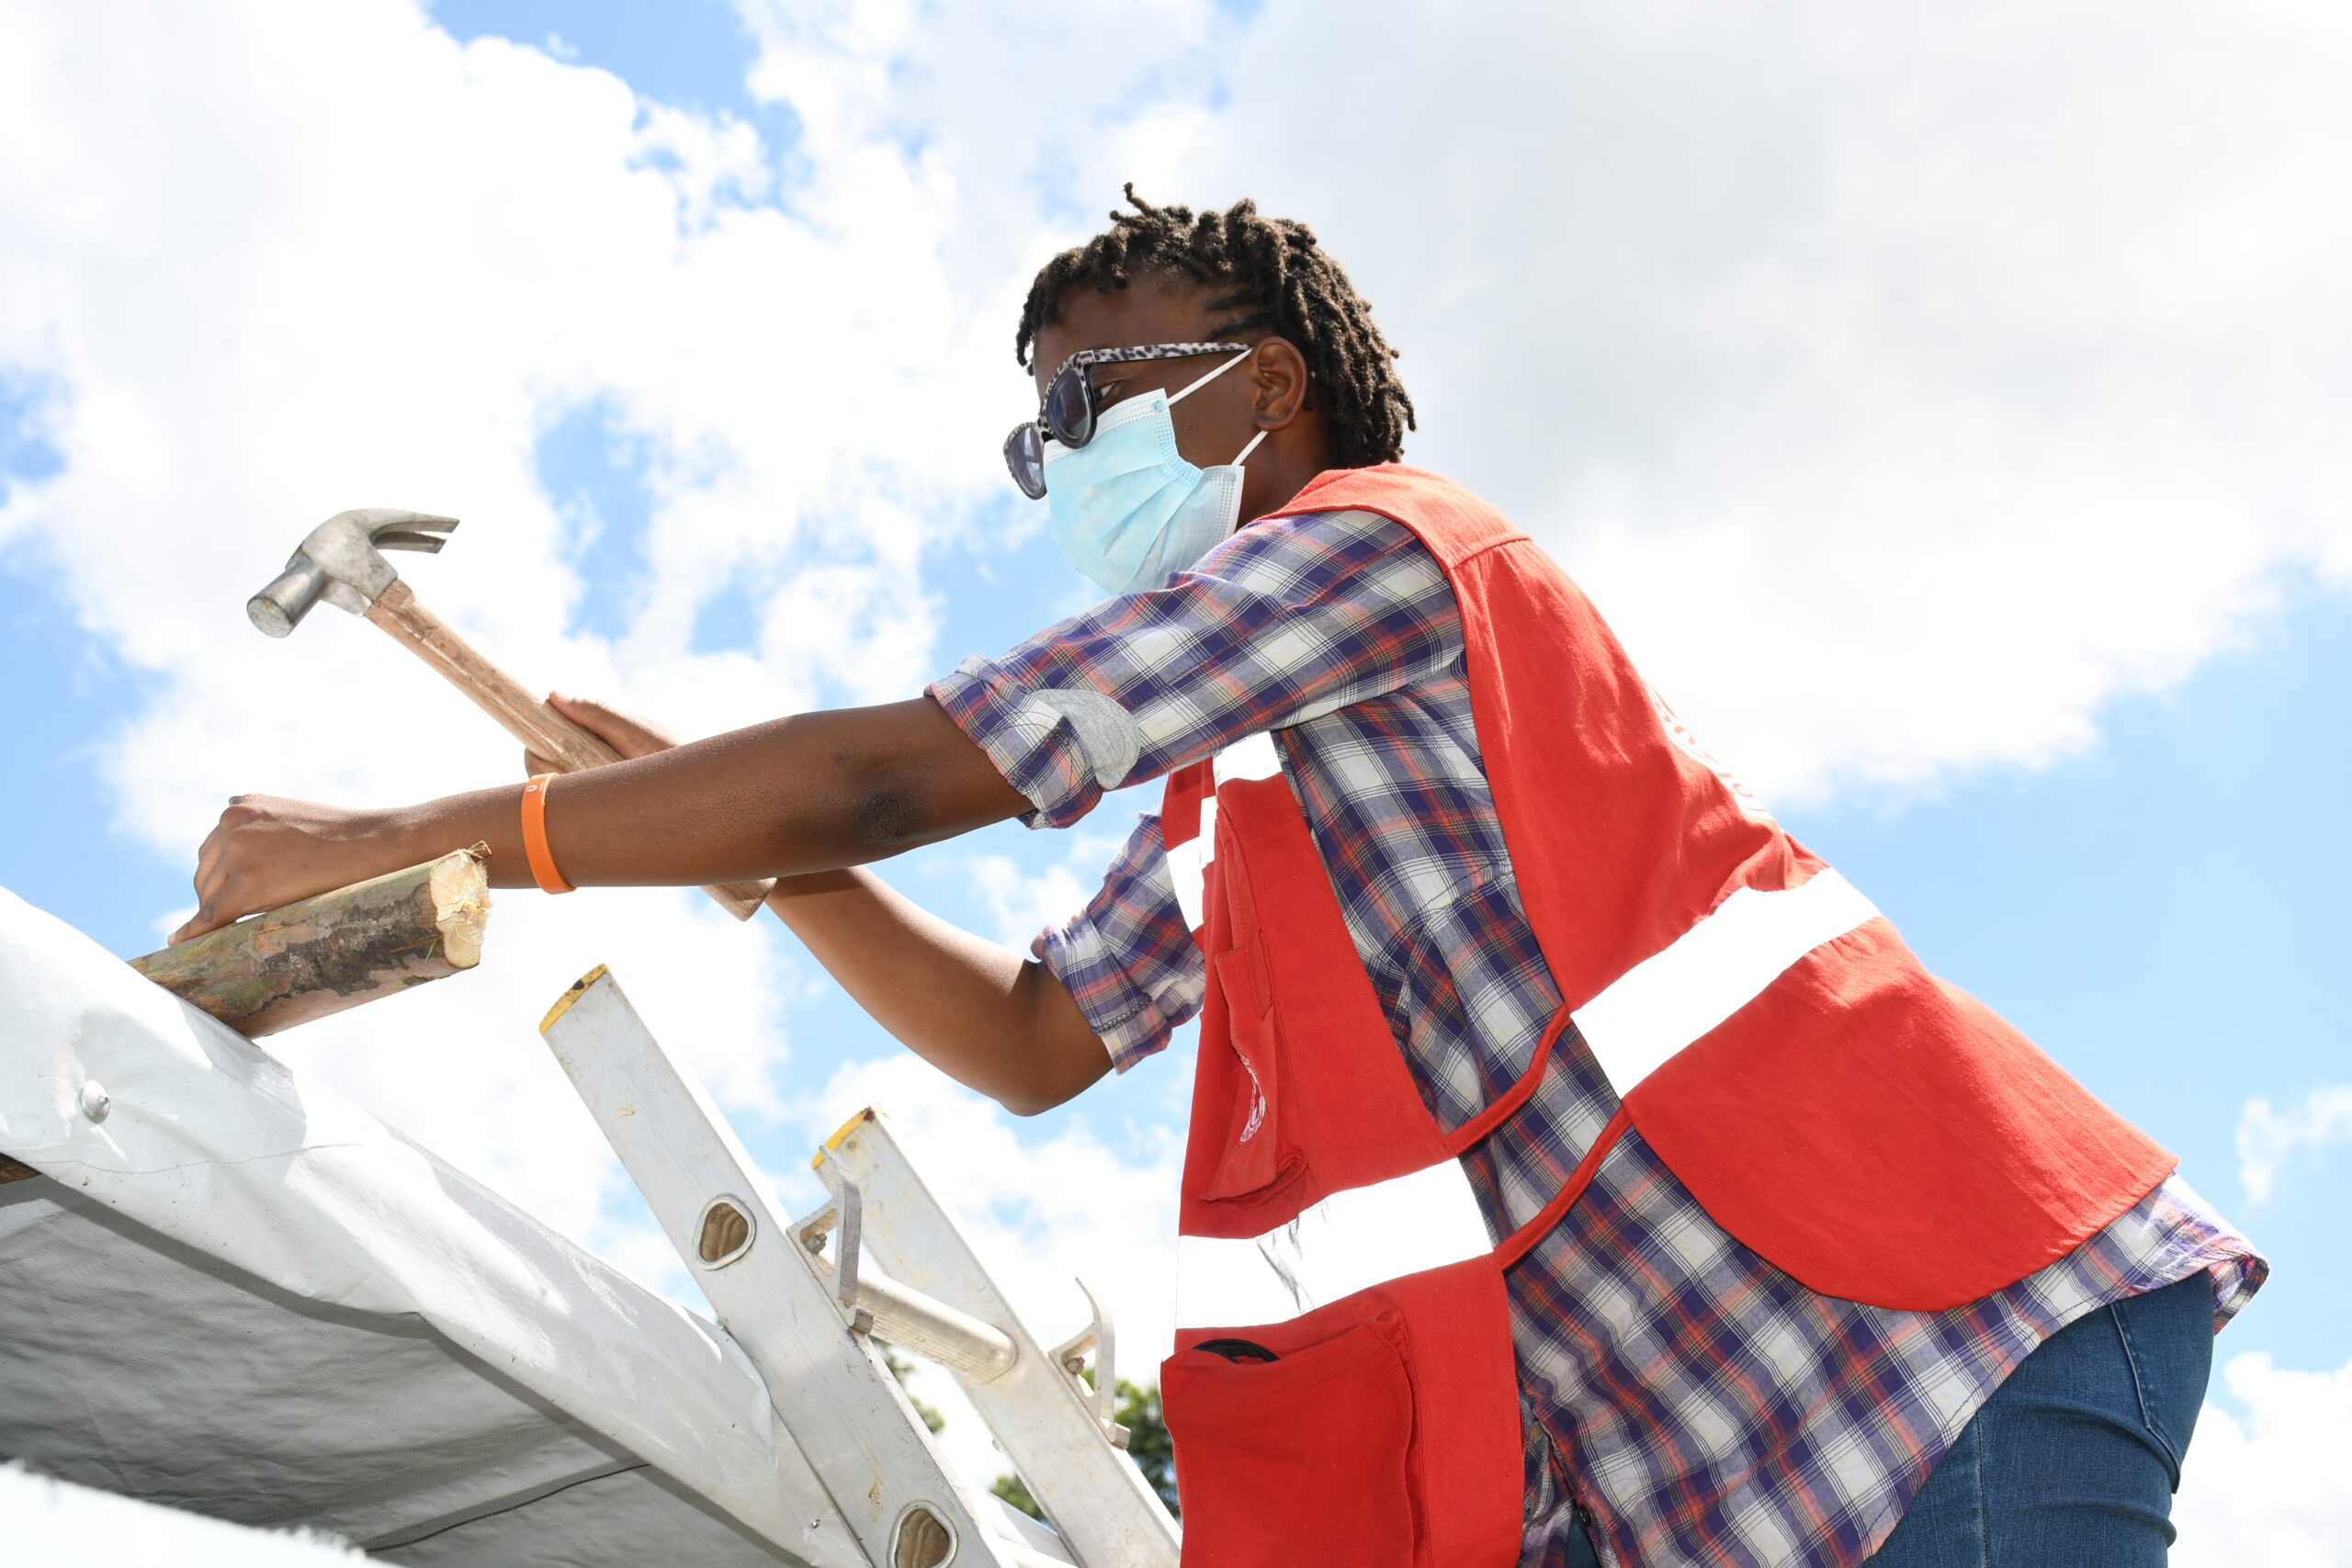 Uganda, Fort Portal, 02.12.2020
During disasters and emergencies, lifesaving work goes on behind the scenes. In 2020 Uganda Red Cross reported 700 new volunteers. We thank each and every one of them.